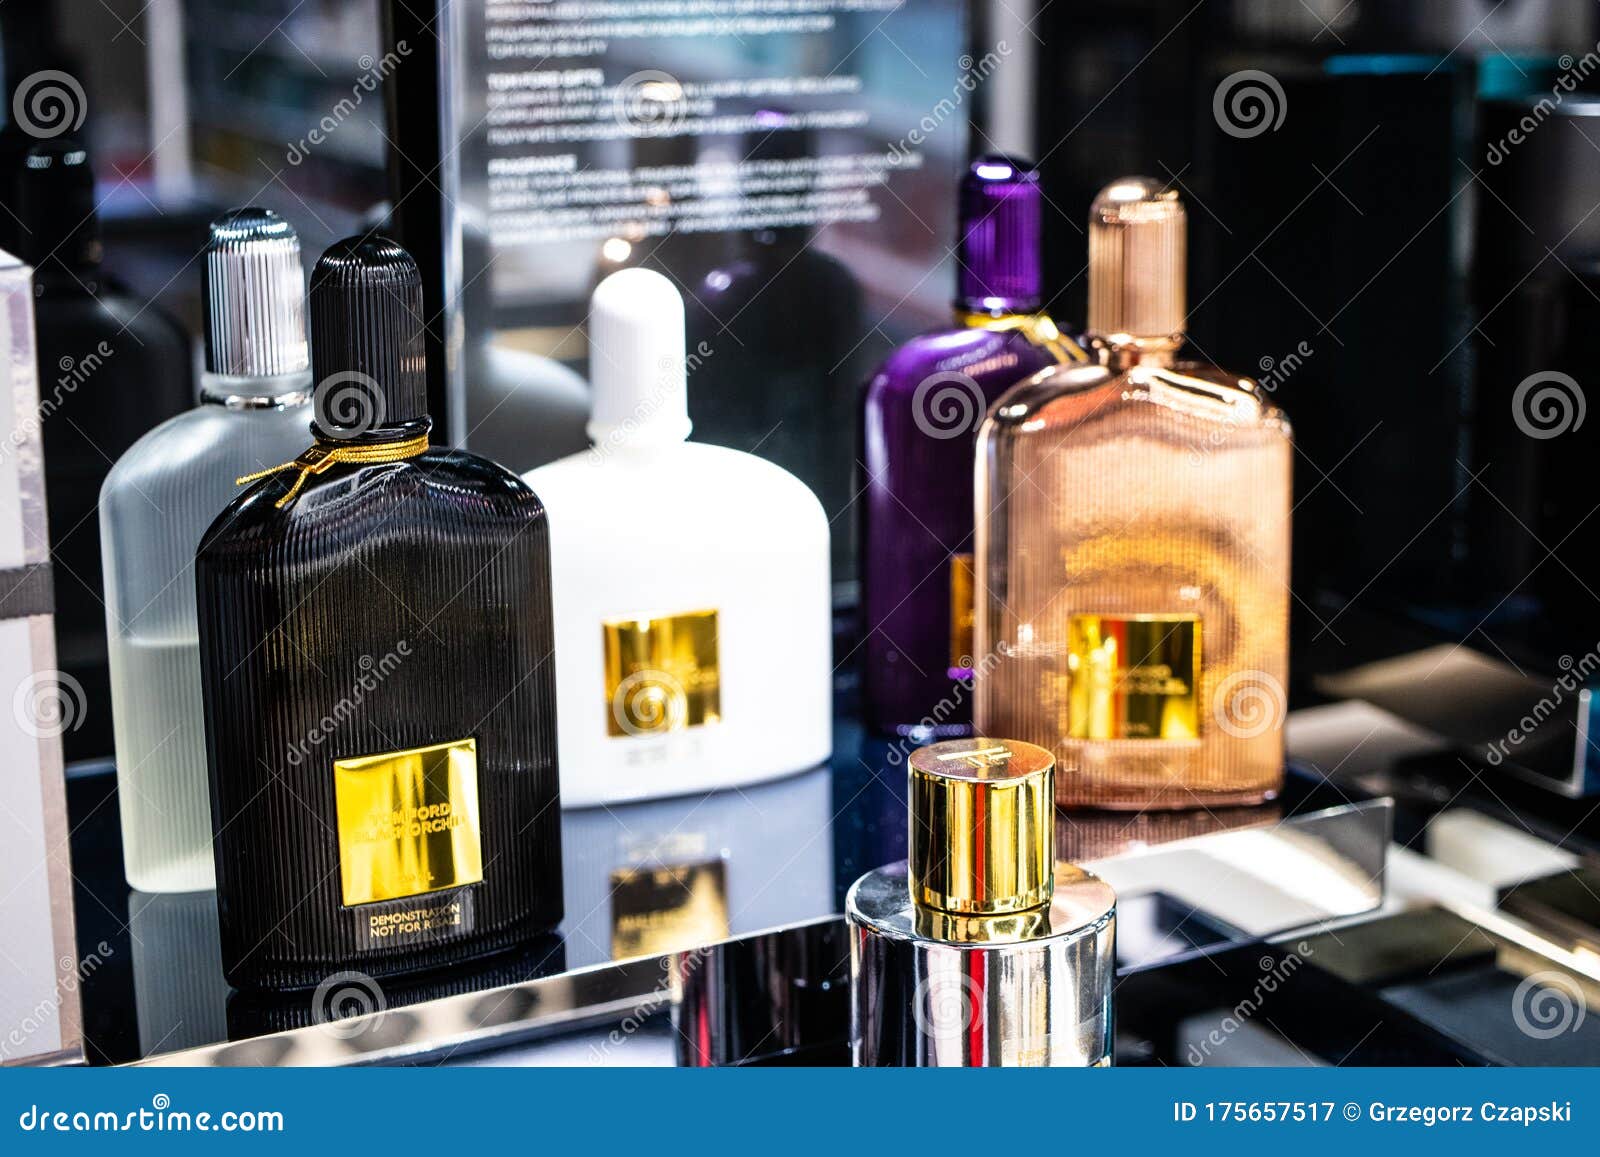 Tom Ford Fragrance, Perfume on the Shop Display for Sale, Thomas Carlyle  Ford is American Fashion Designer Editorial Photography - Image of liquid,  female: 175657517